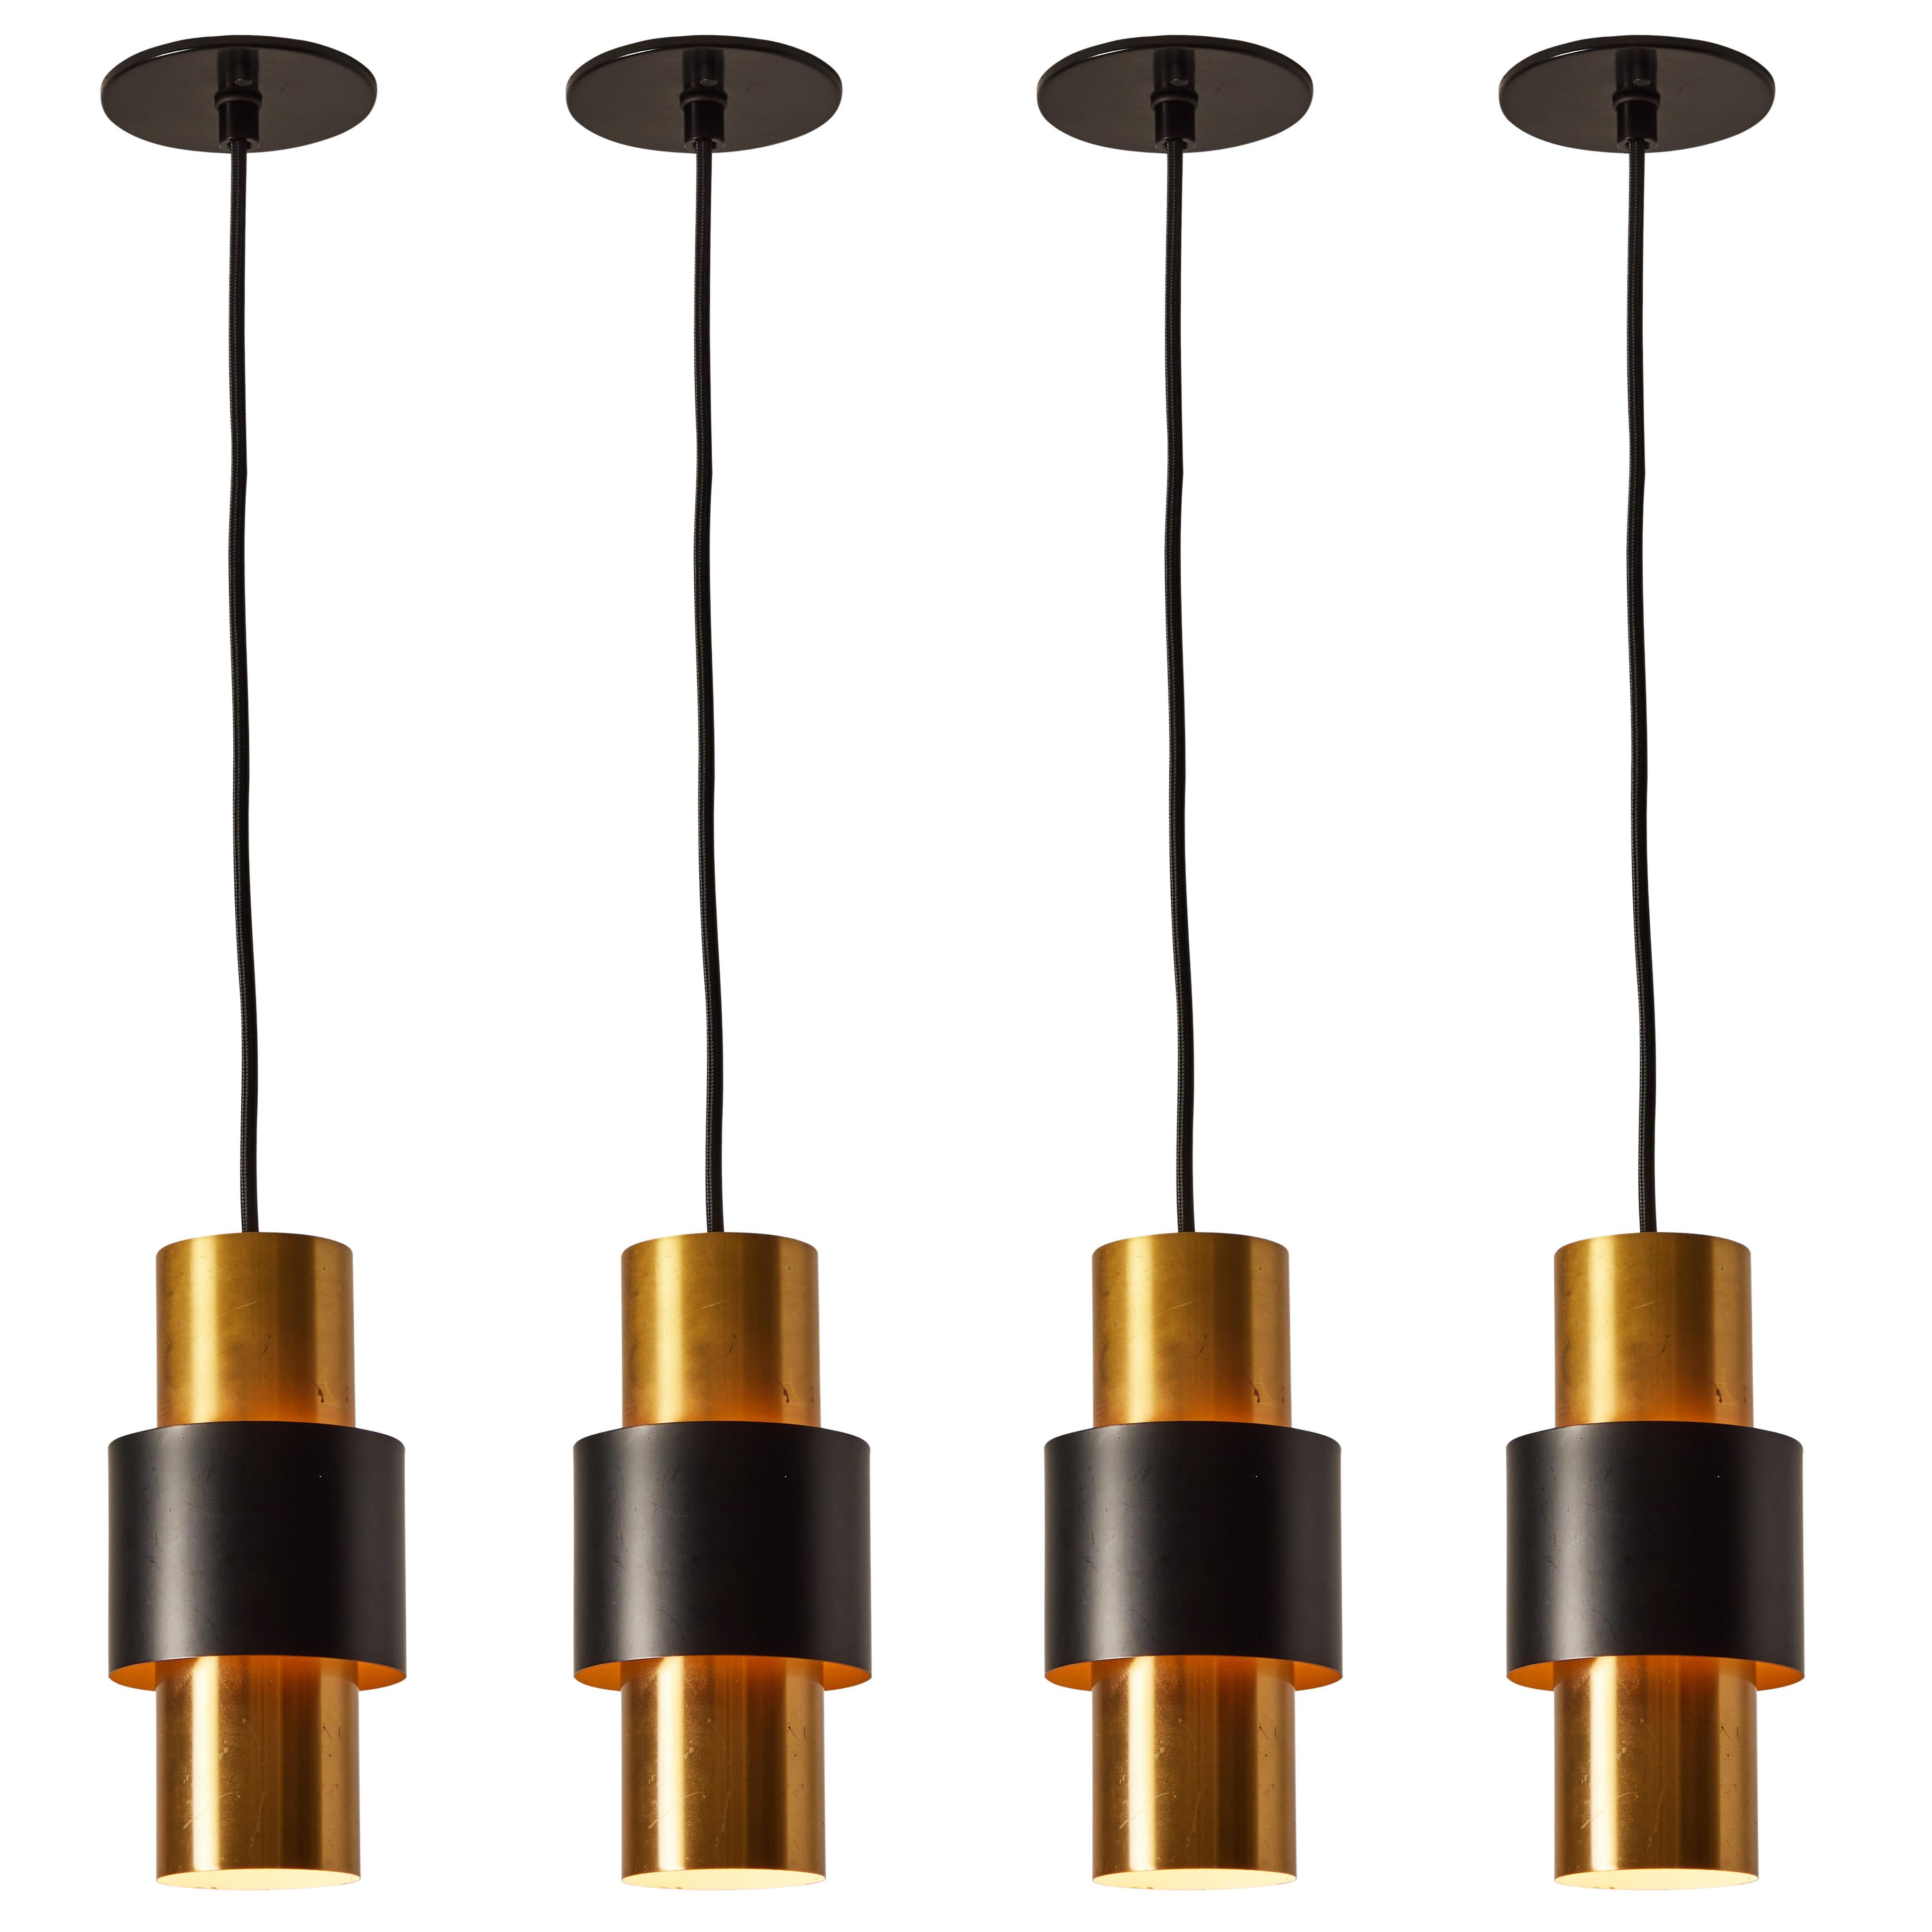 1950s Jo Hammerborg 'Saturn' brass & black pendant for Fog & Mørup. A Minimalist Danish modern design Classic executed in brass and black enameled metal. Body of lamp measures approximately 9.5 inches in height.

Fog and Mørup was one of the most